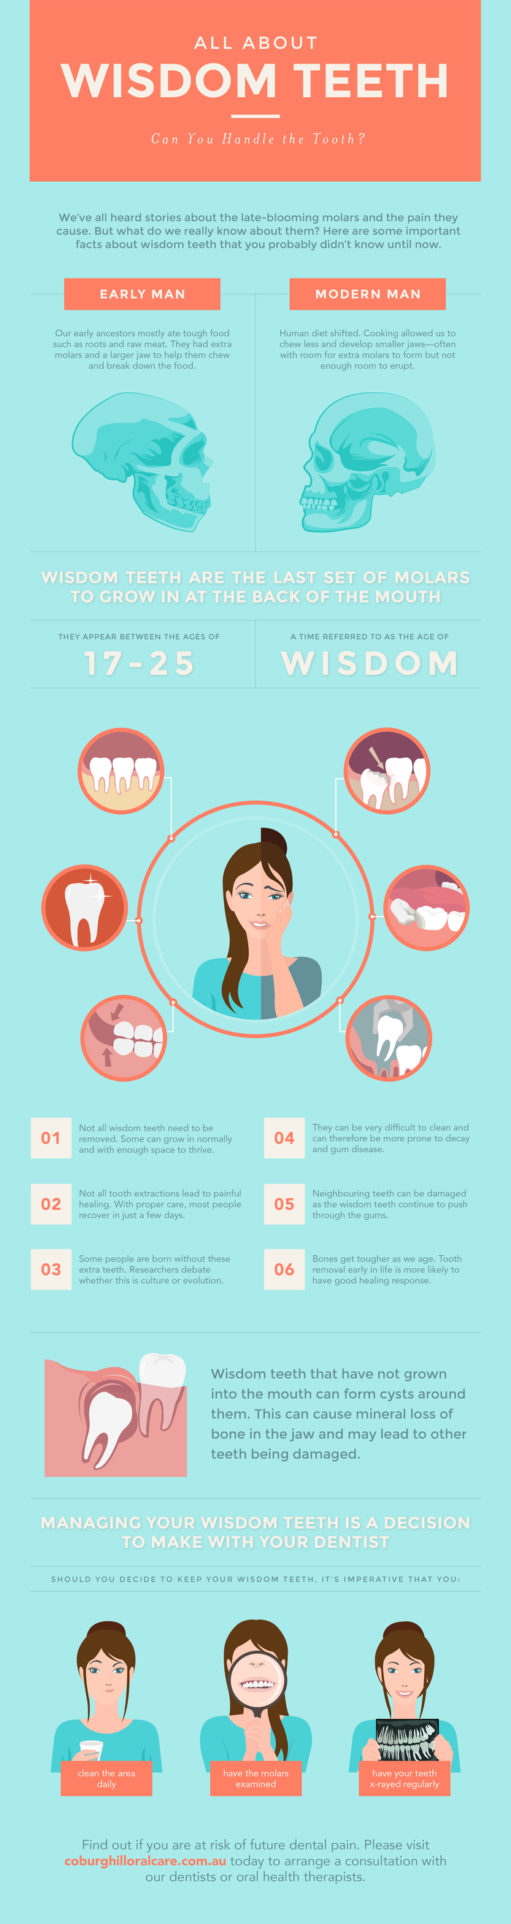 Surprising Facts about Wisdom Teeth That You Need To Know